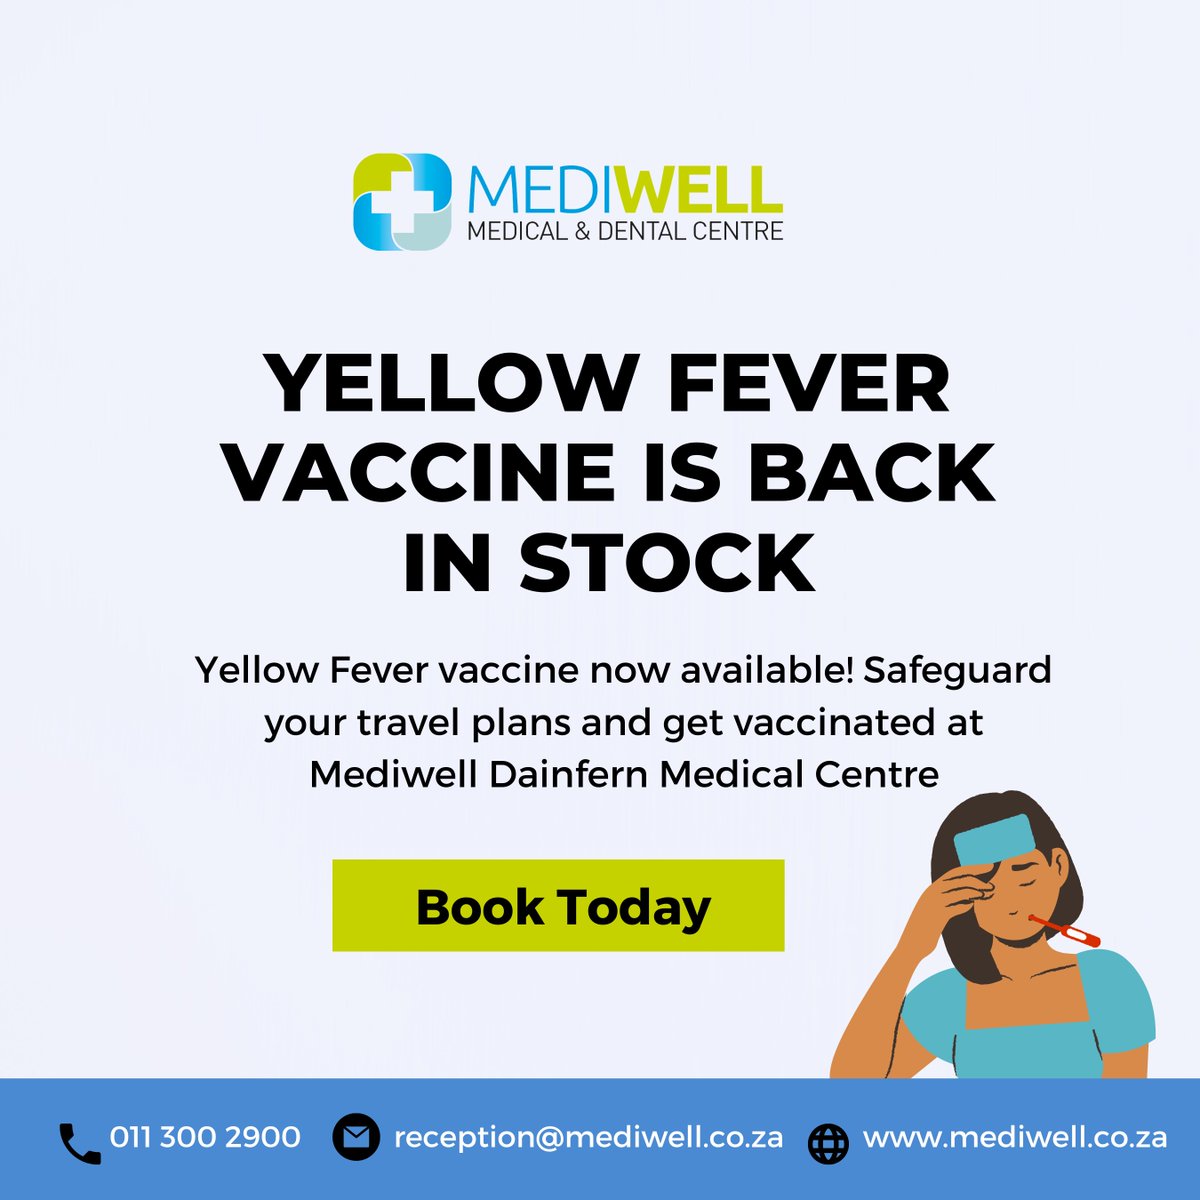 📢 Exciting news! 📢 The Yellow Fever vaccine is now available at Mediwell Dainfern Medical Centre. 🌍🩺 Protect yourself for your upcoming travels and stay safe from this preventable disease. Book your vaccination appointment today! #YellowFeverVaccine #TravelClinic #Mediwell